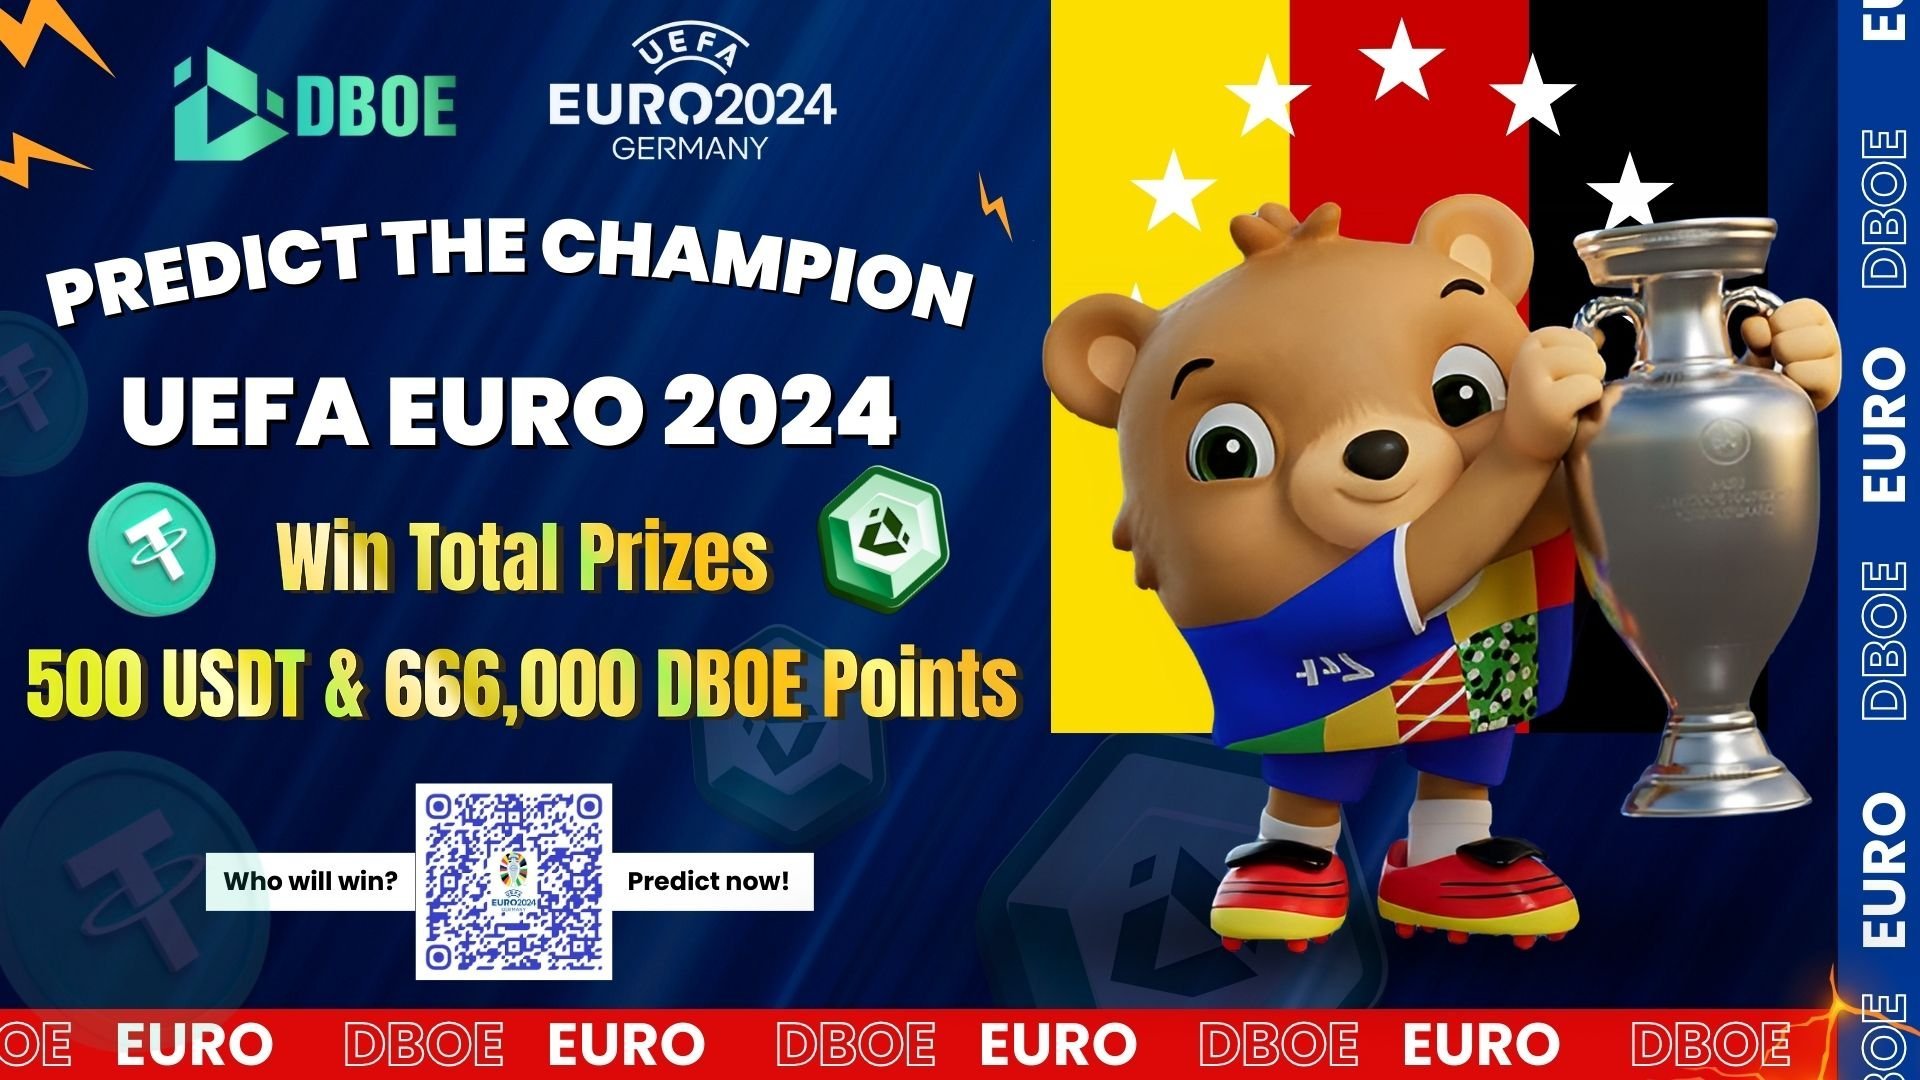 Predict Euro 2024 Champion with DBOE to Win 500 USDT & 666,000 D-Points! 🏆⚽️